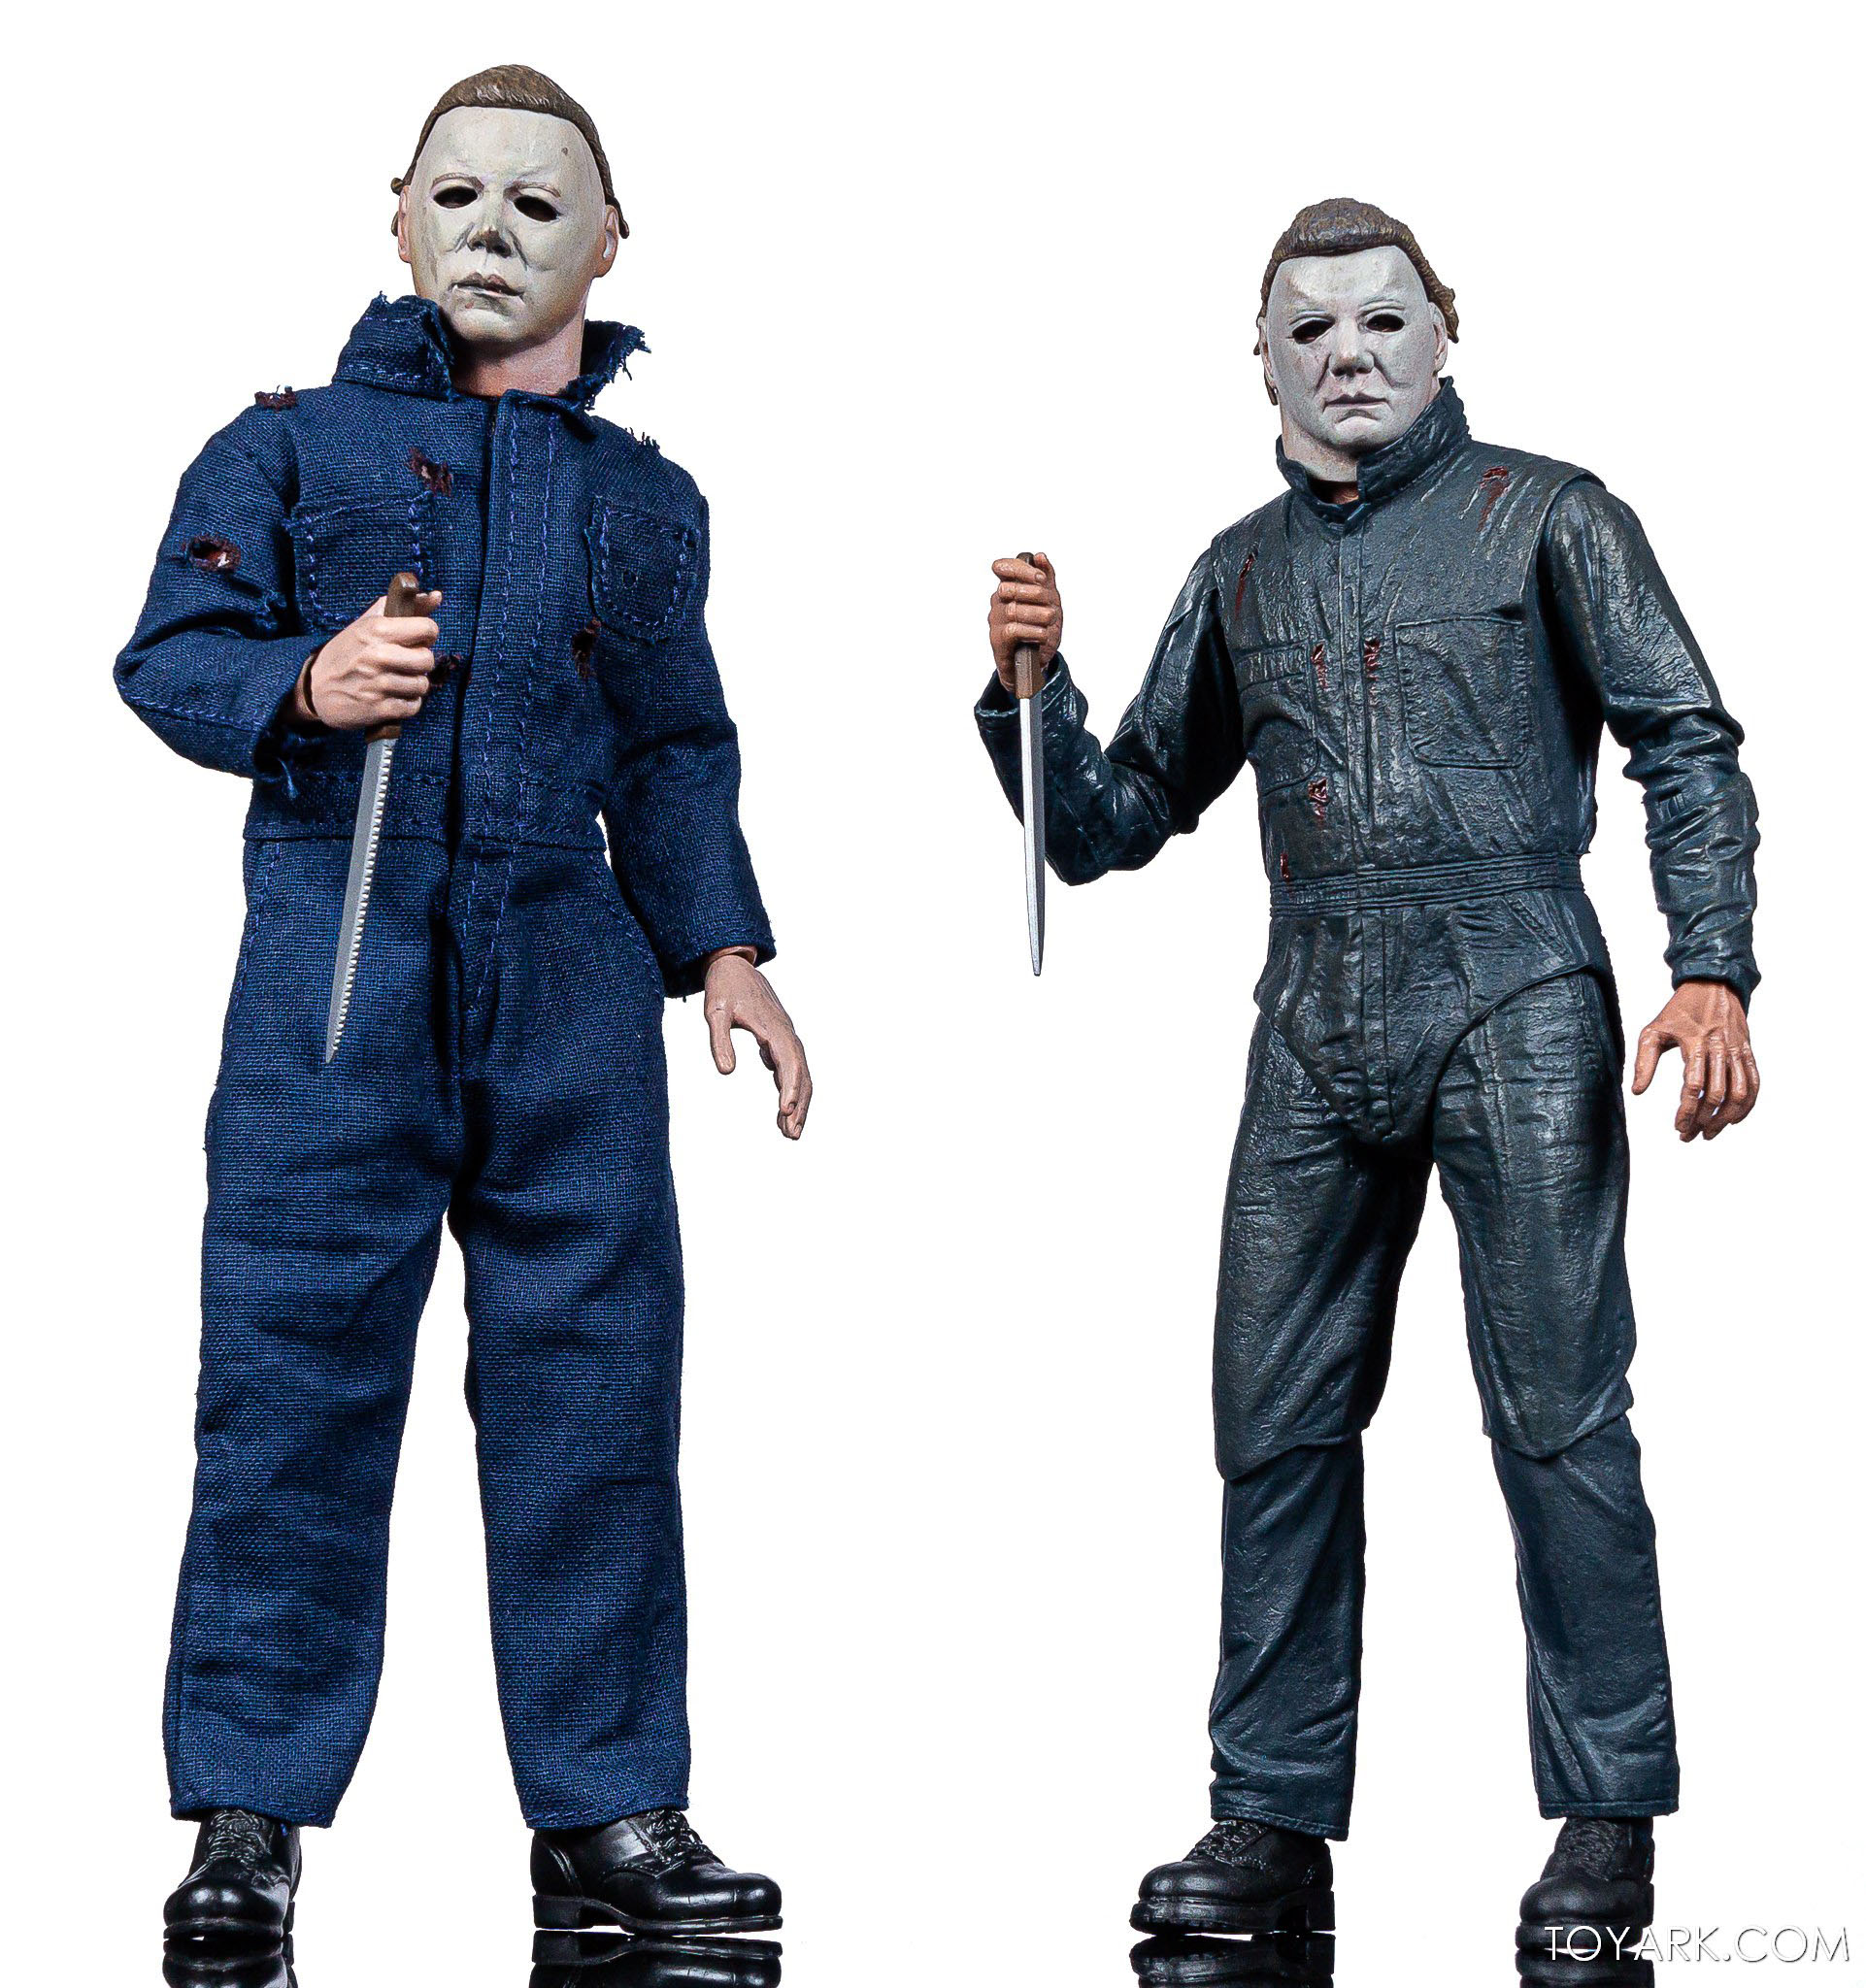 Halloween-2-Clothed-Michael-Myers-015.jpg